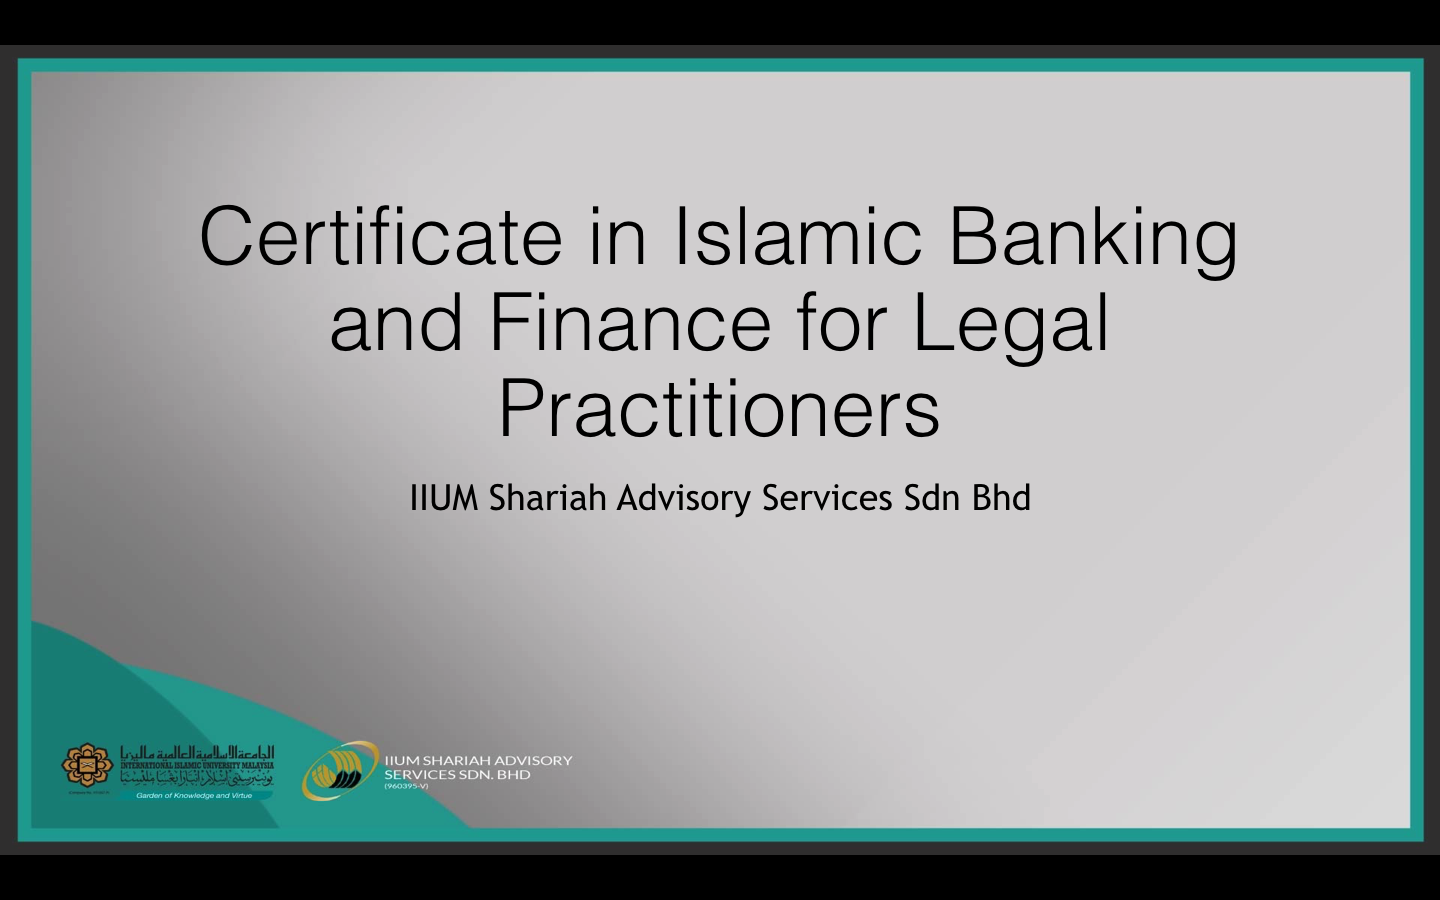 Demo Course : Certificate of Islamic Banking for Legal Practioners  CIBFLDEMOV12020